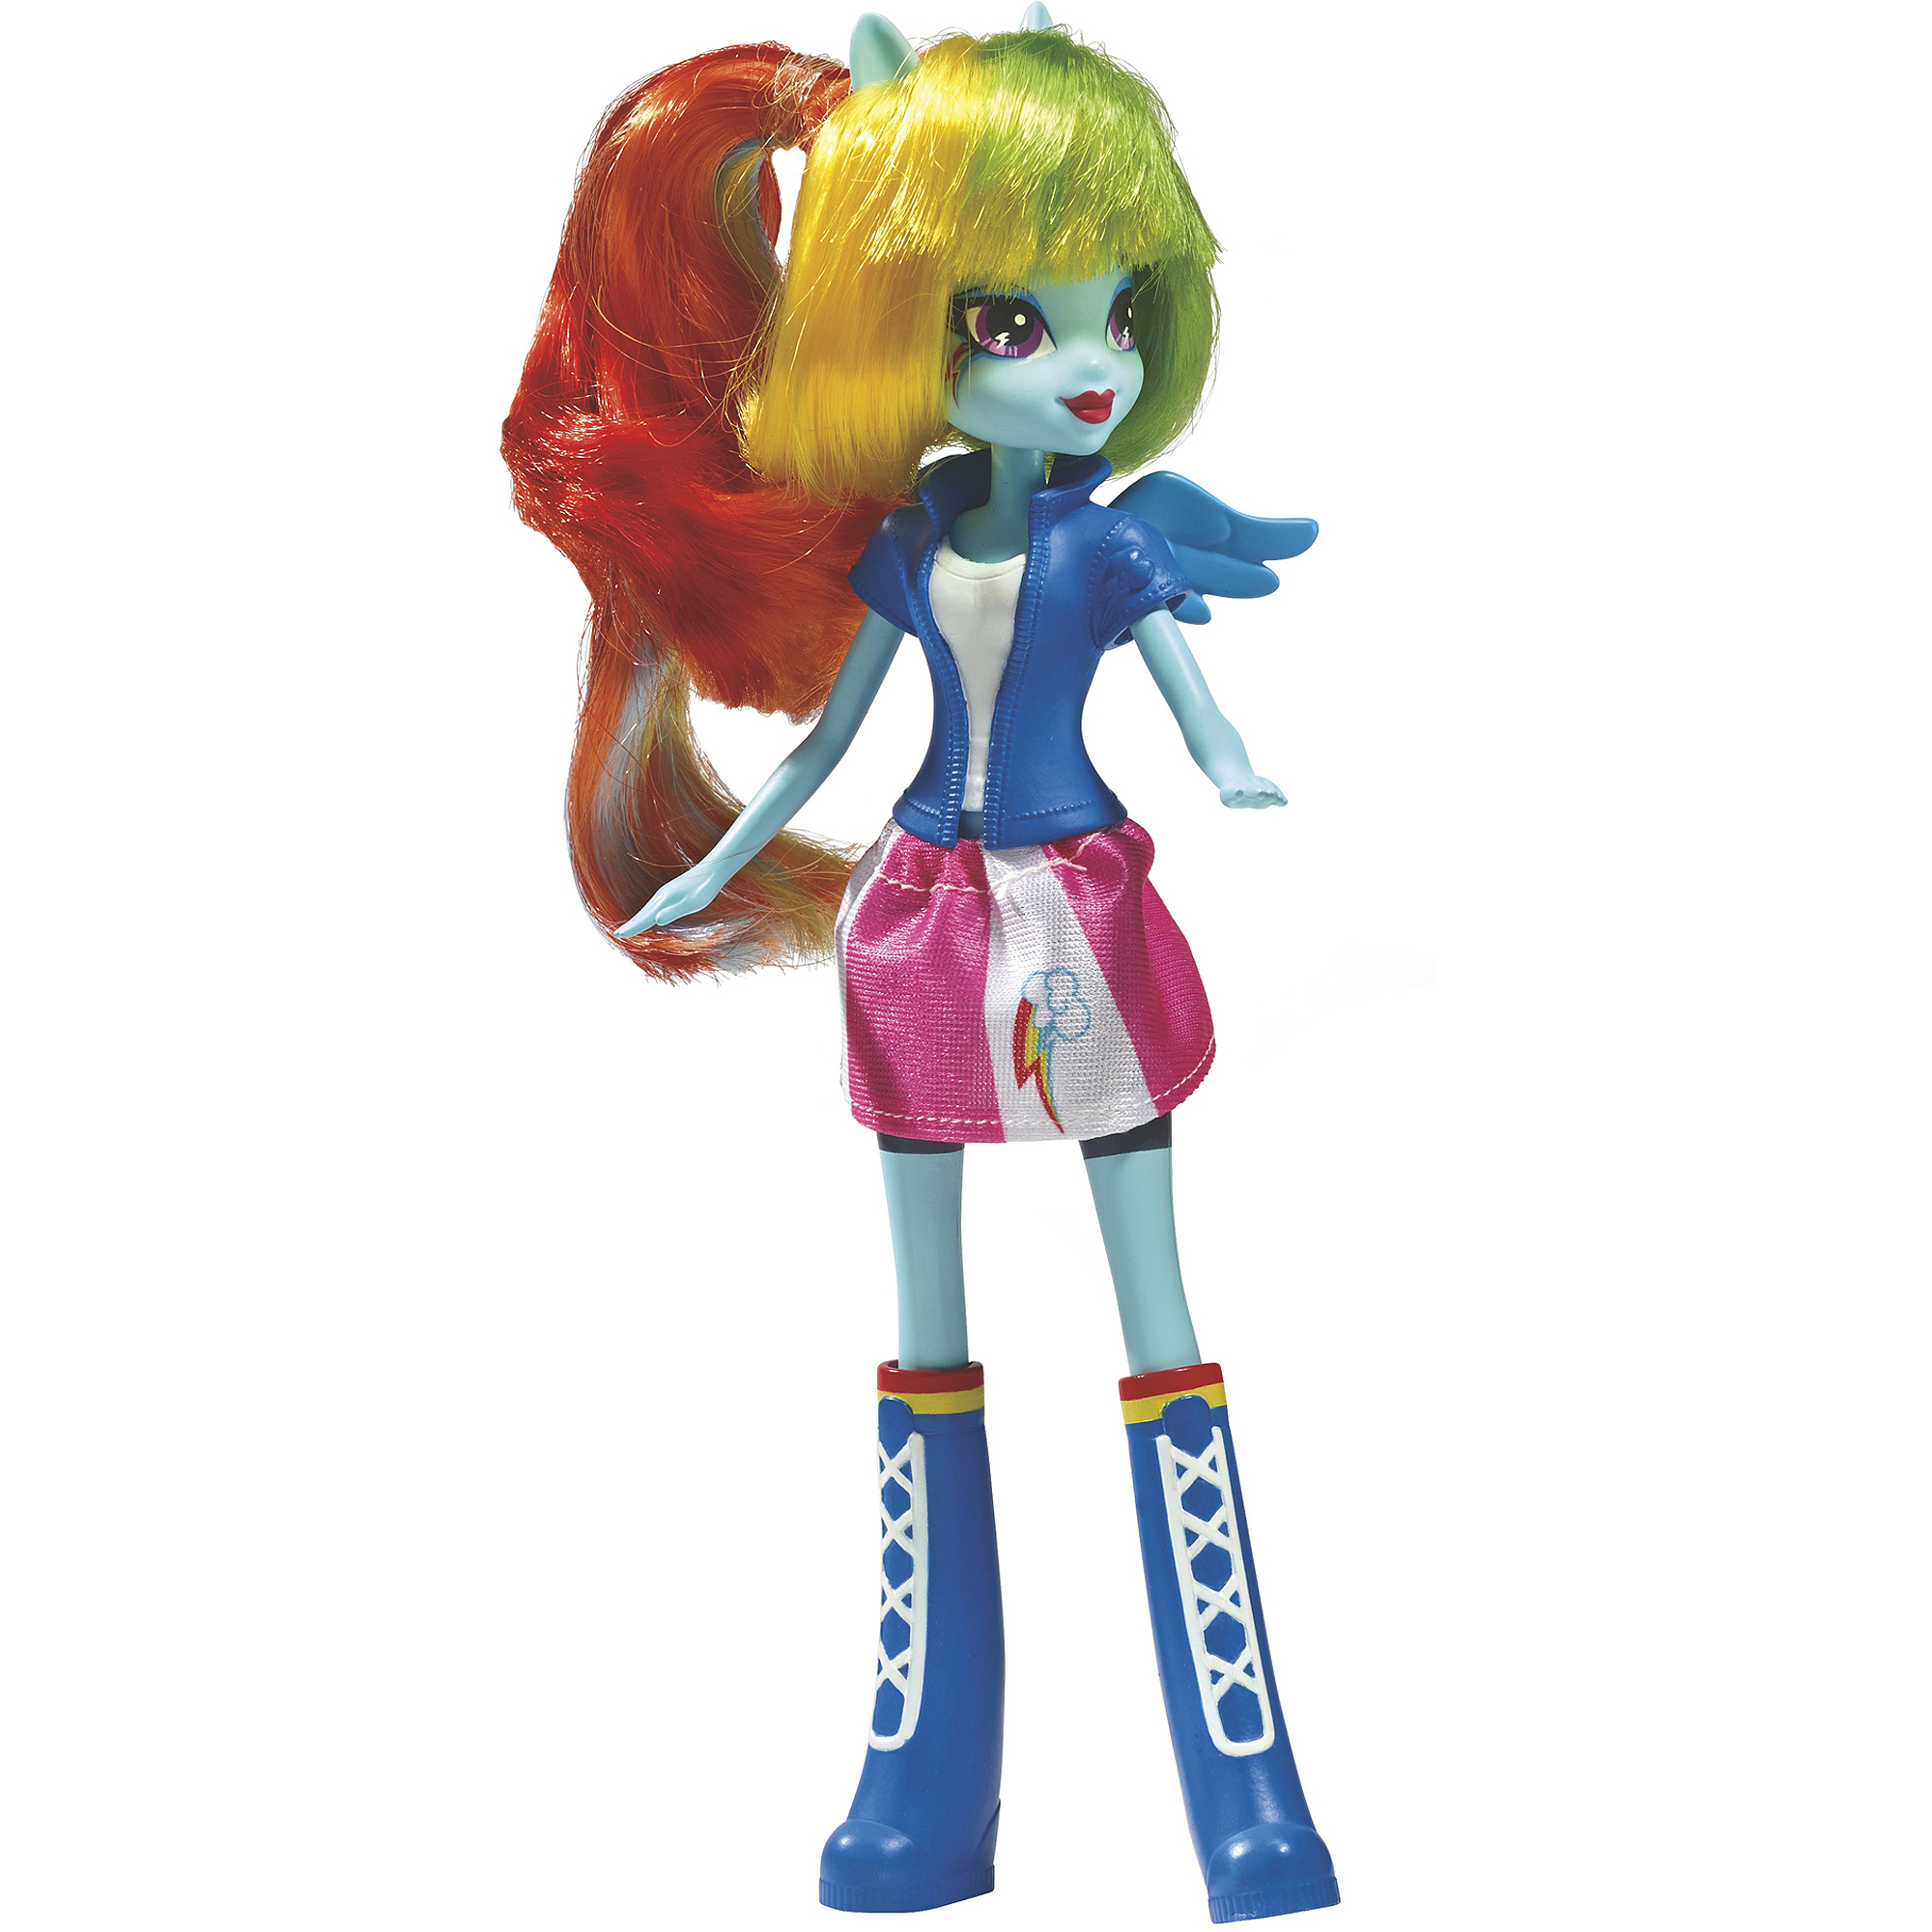 My Little Pony Equestria Girls Collection Rainbow Dash Doll - image 1 of 4